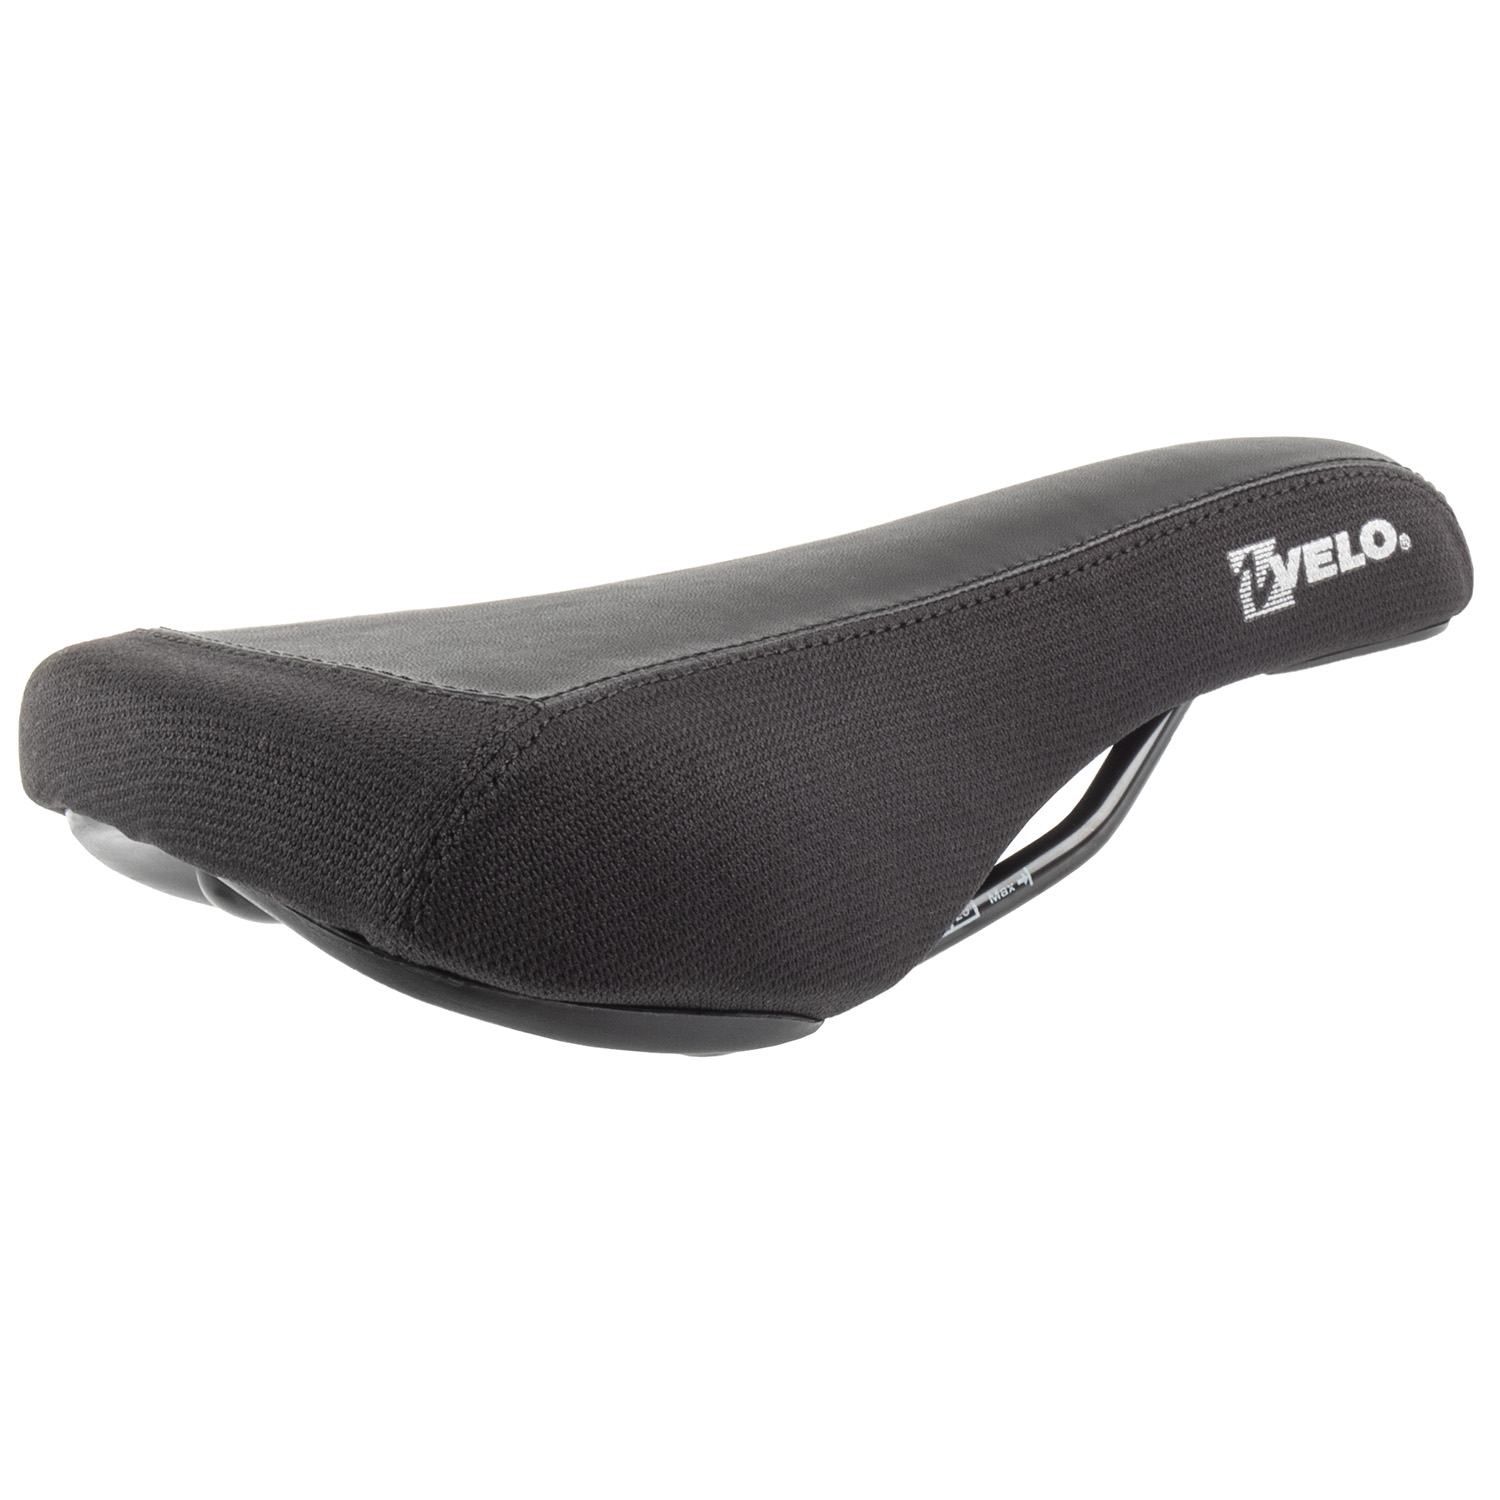 250290 VELO Melow saddle – AVAILABLE IN SELECTED BIKE SHOP